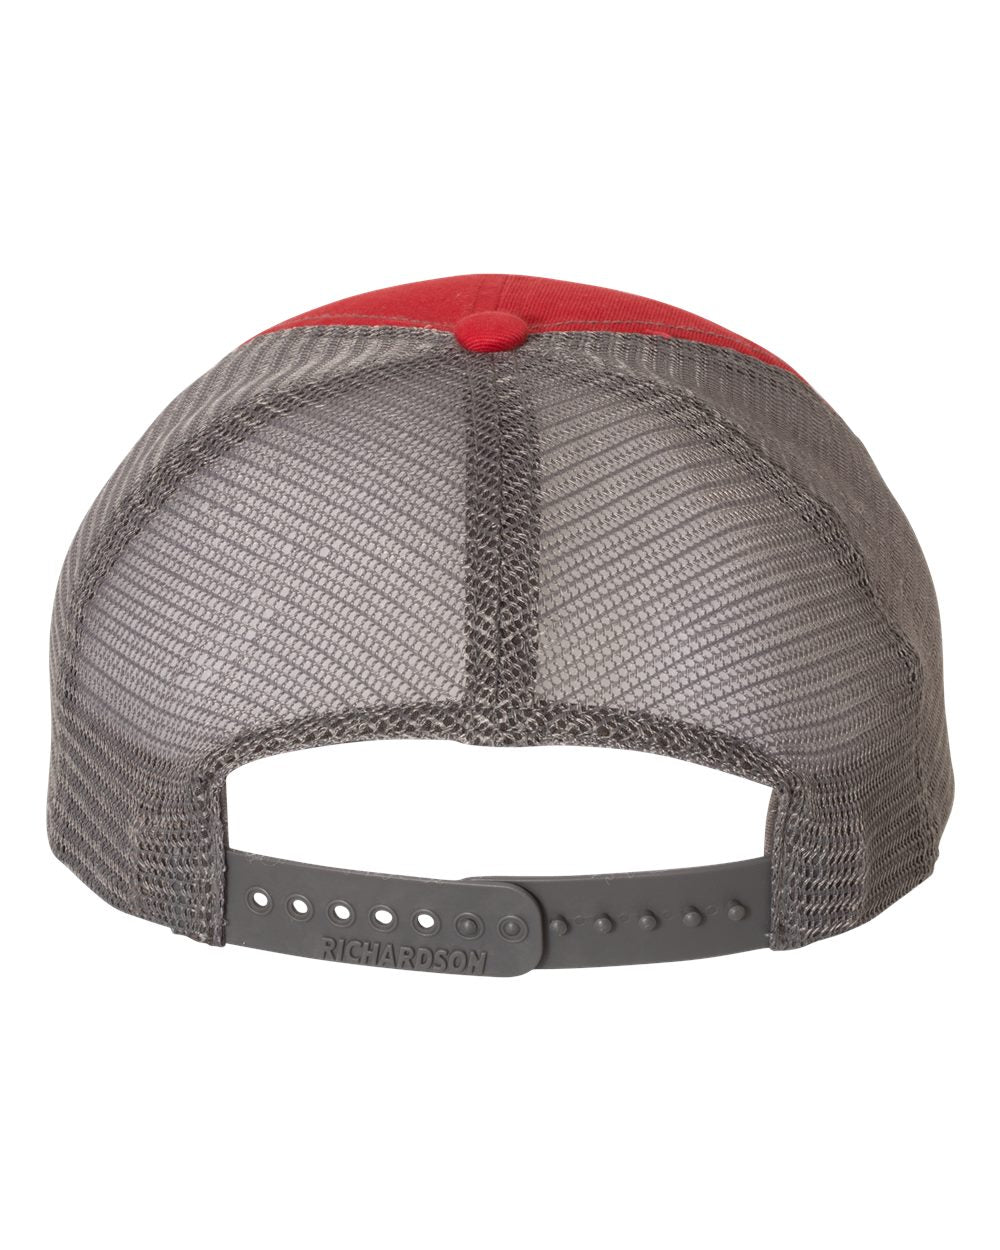 Richardson Garment-Washed Branded Trucker Caps, Red Charcoal